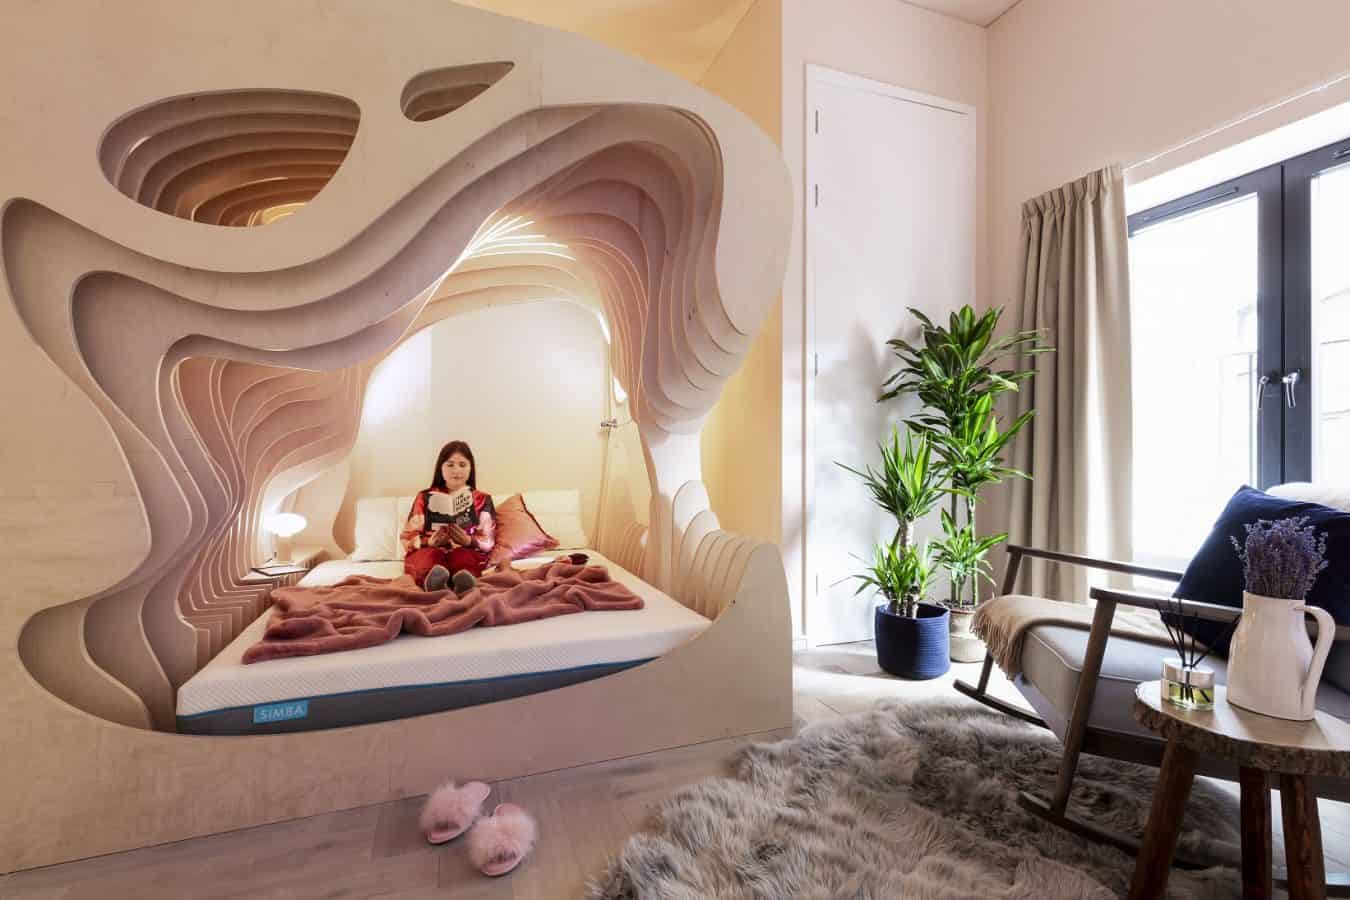 Trendy Shoreditch hotel opens up bedroom that resembles a womb to combat “first night effect”